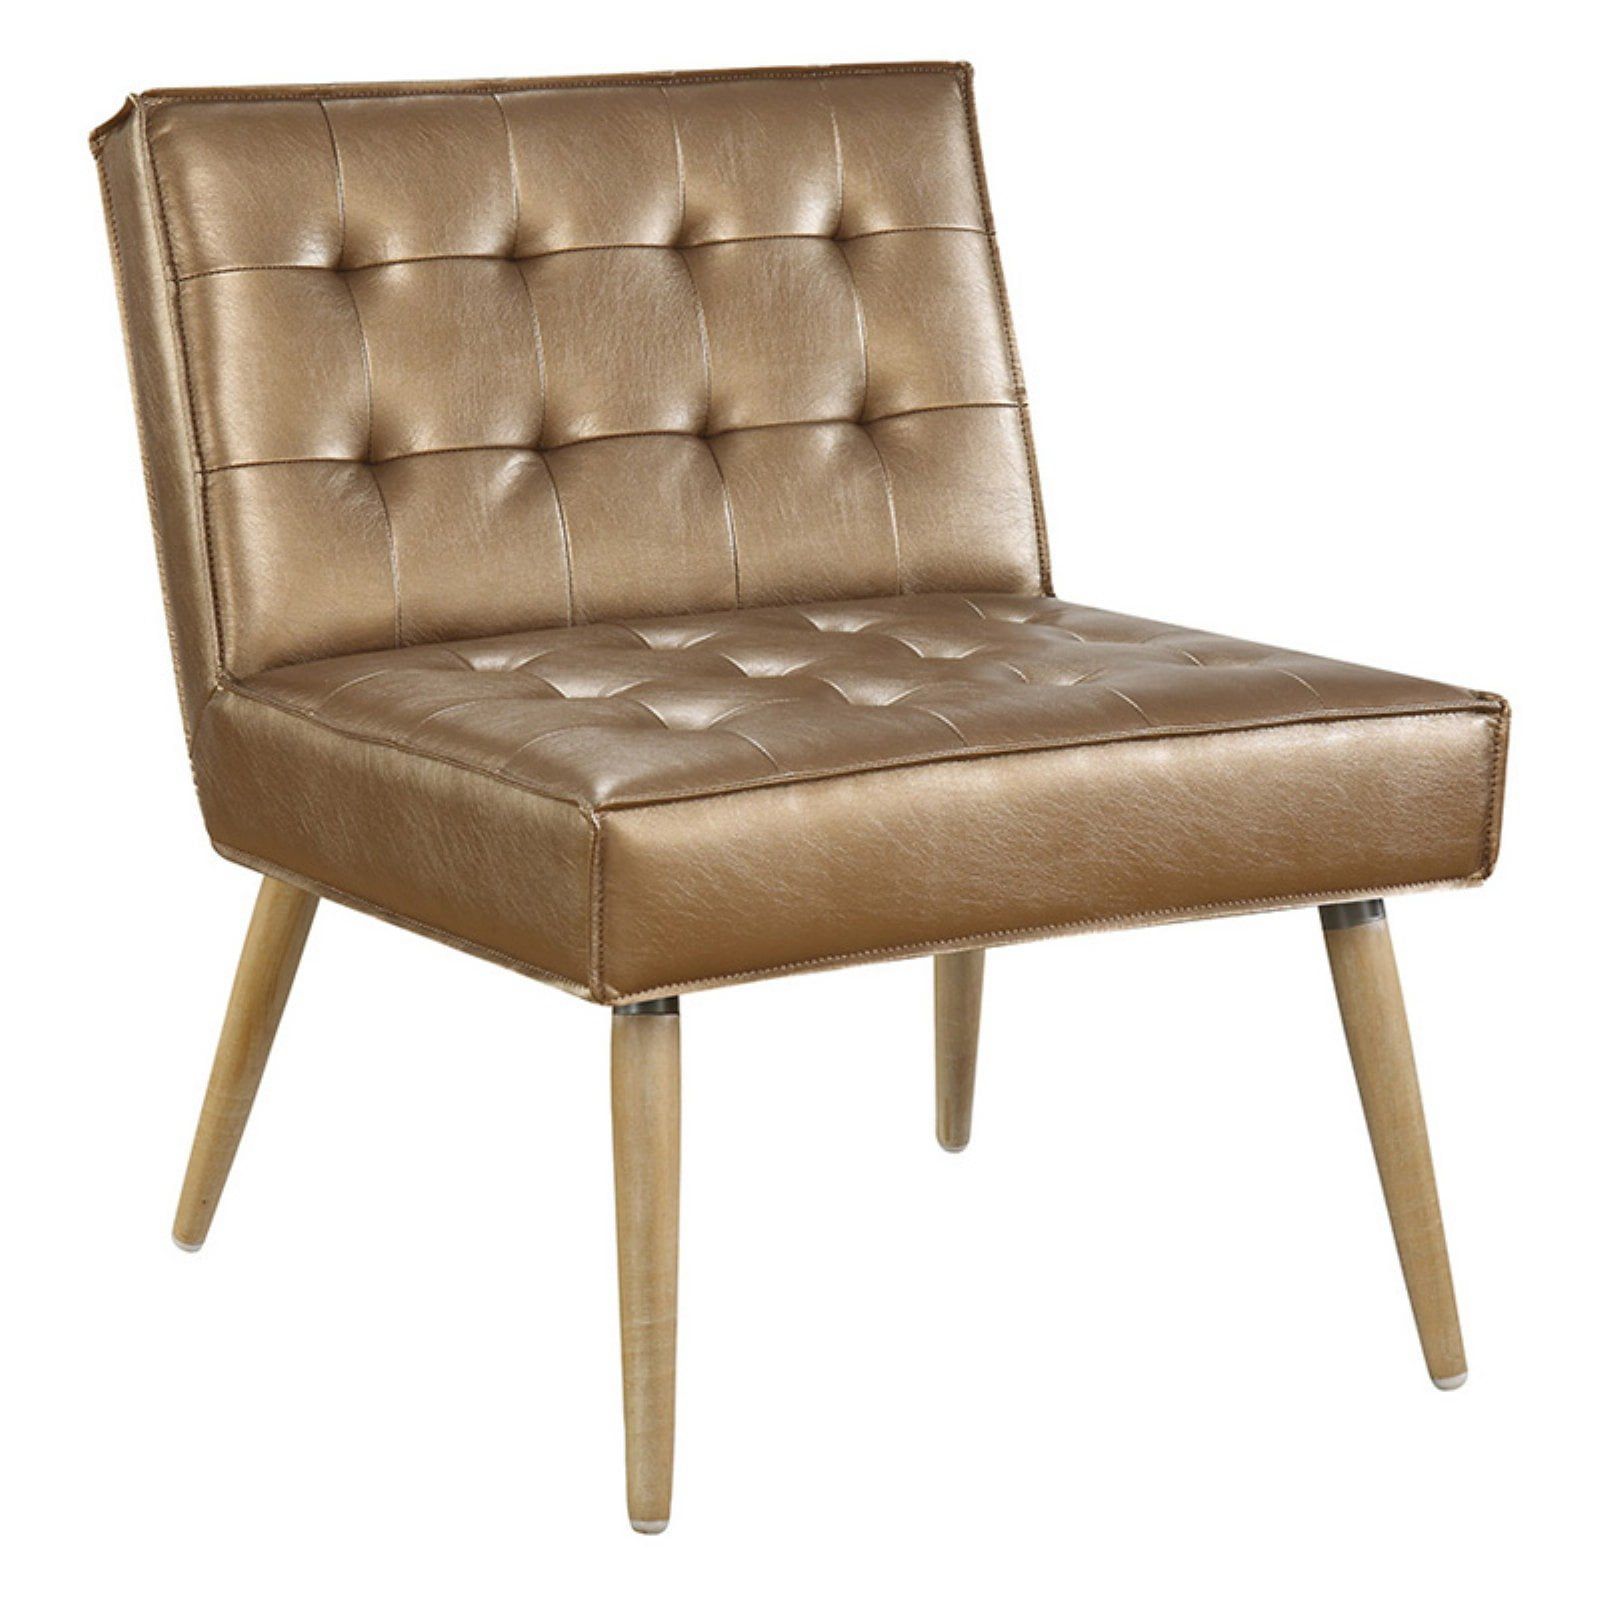 Amity Mid-Century Modern Tufted Accent Chair in Sizzle Copper